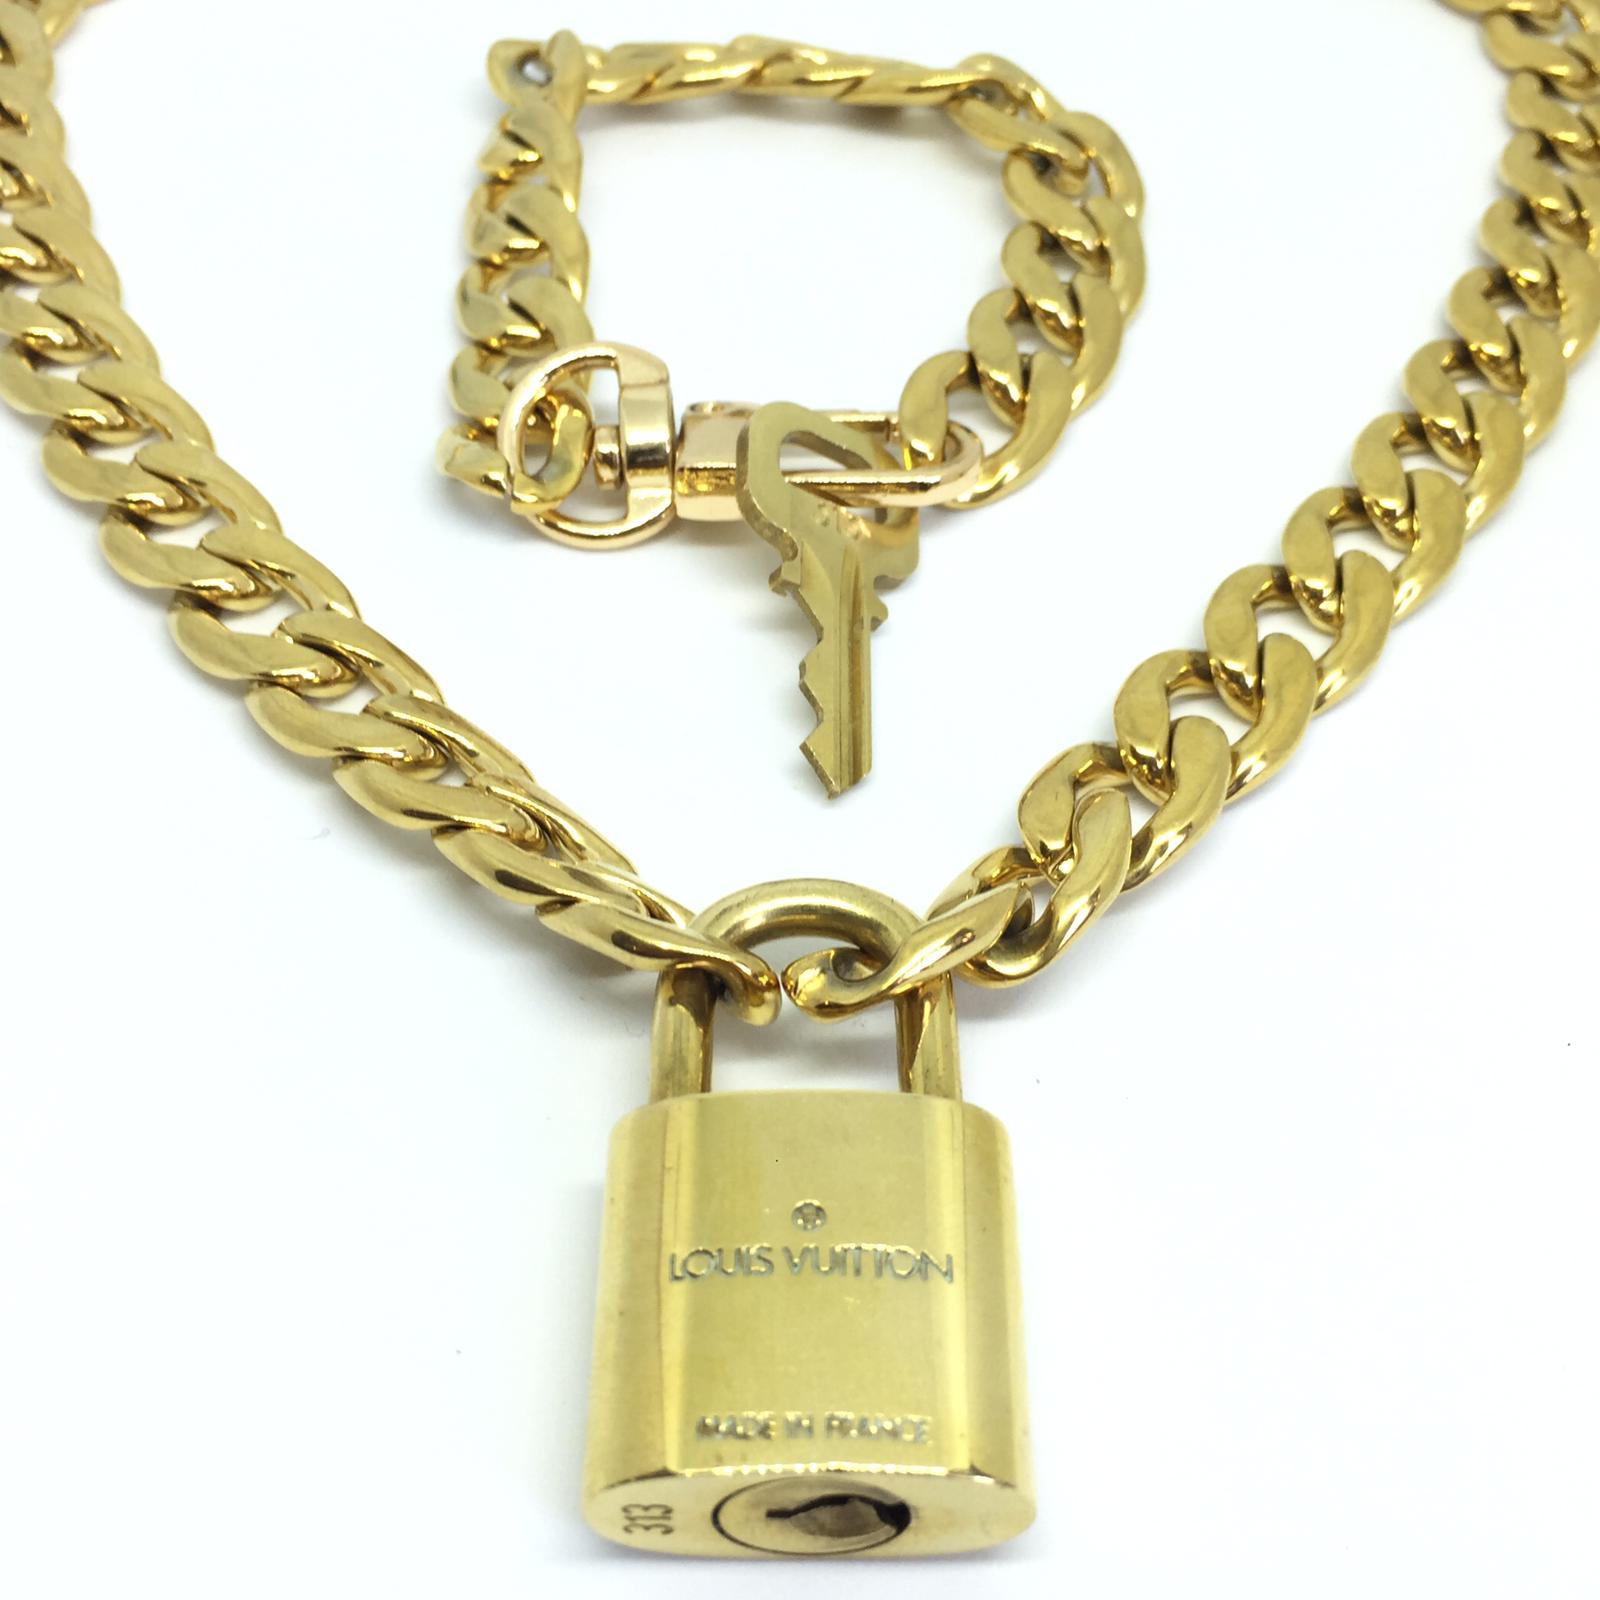 Gold Lock and Key Fob Necklace, Gold LV Lock and Key Vintage Round Ball Cable Chain Add on Lock/Key